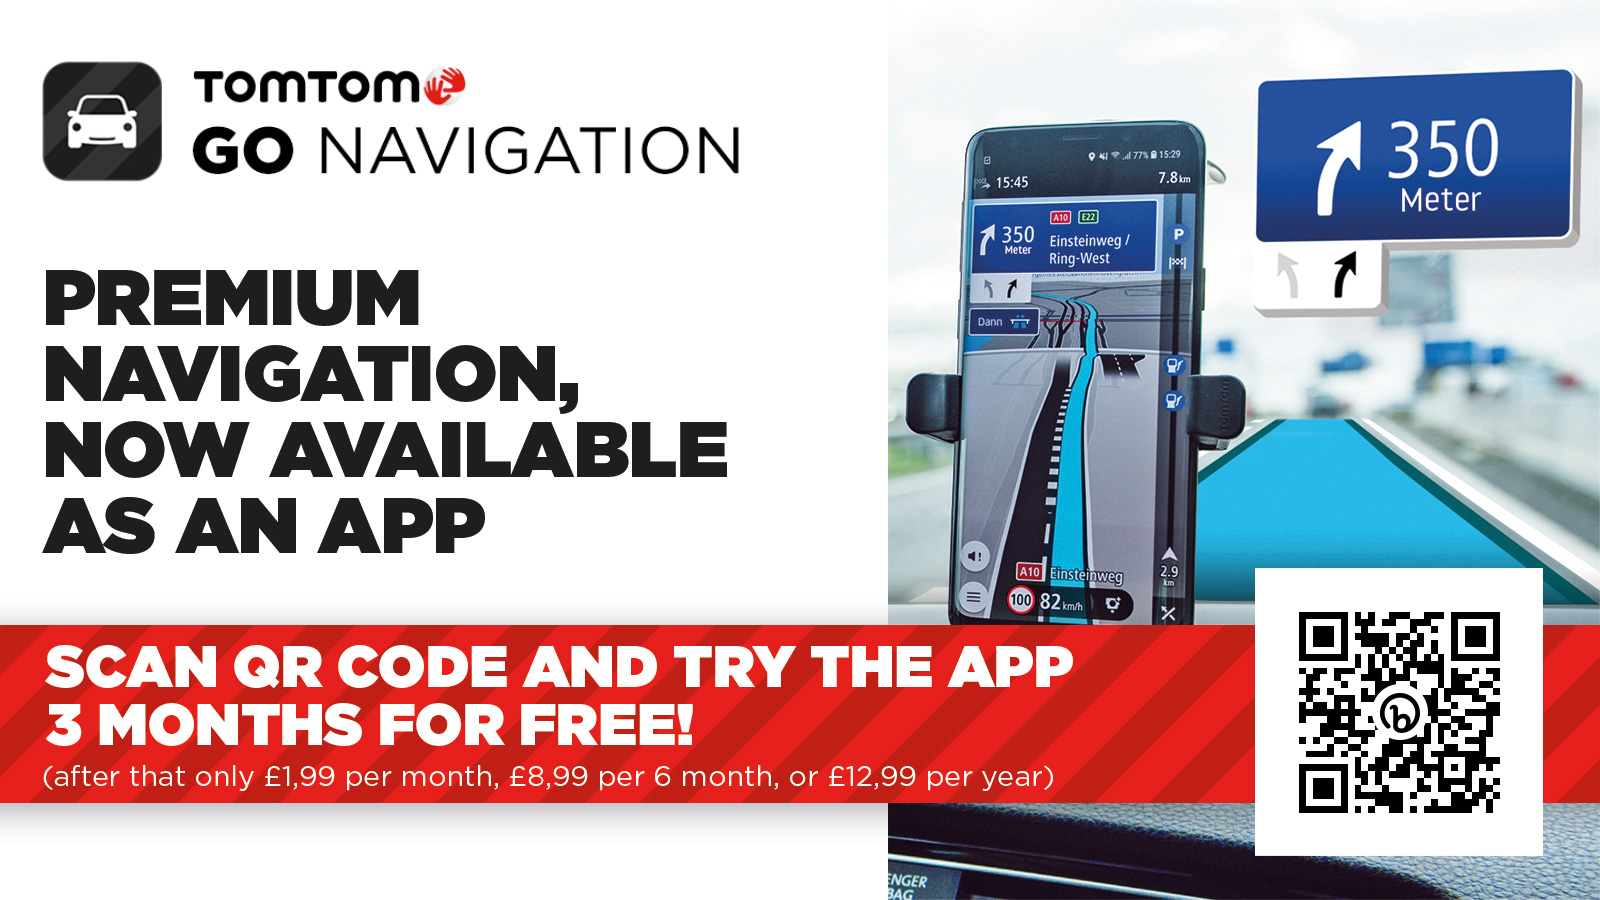 TomTom GO Navigation app available now